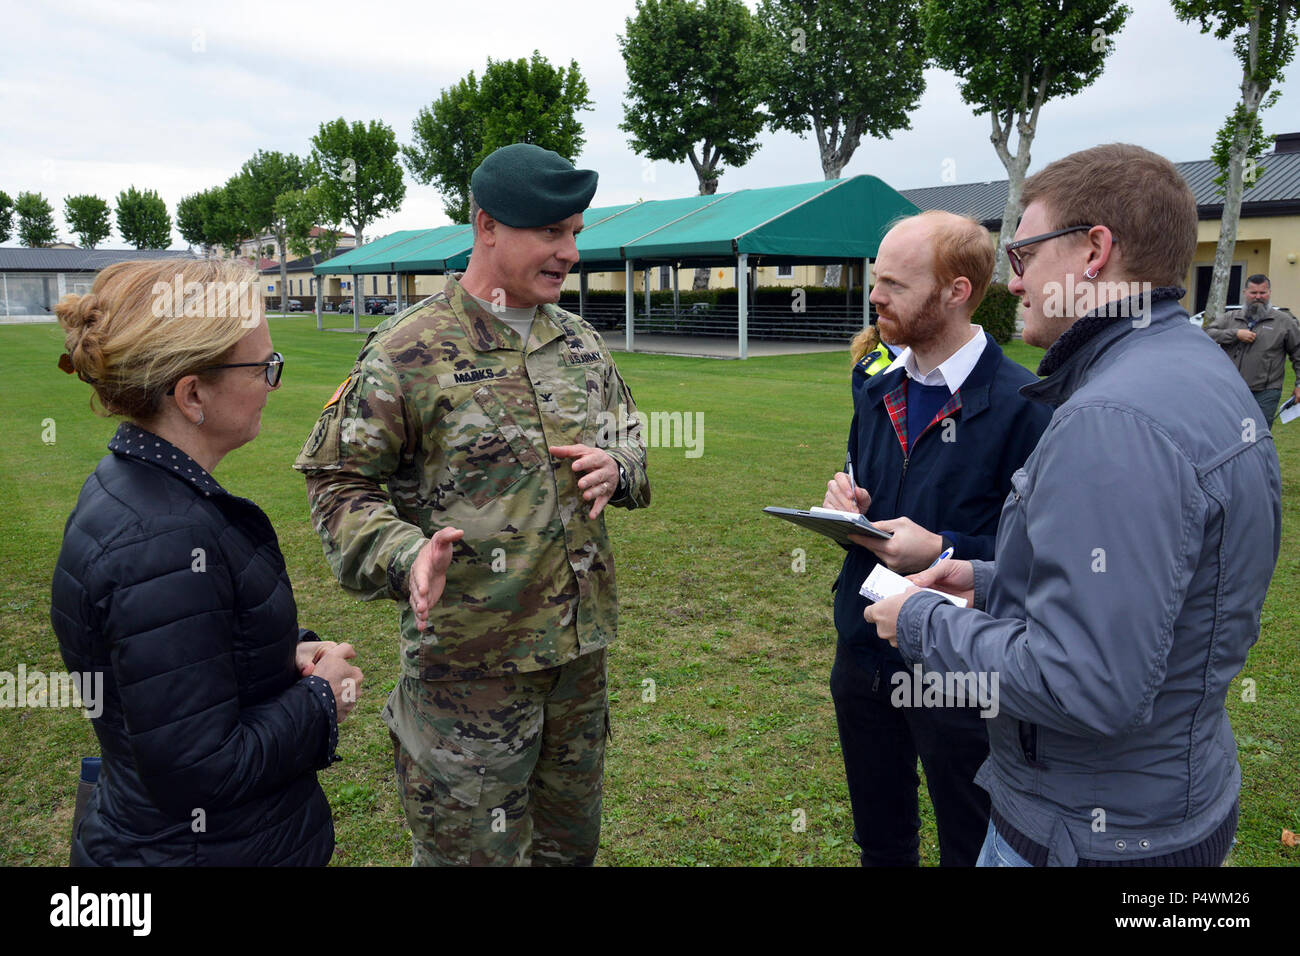 Col. Steve Marks, U.S. Army Garrison Italy commander, explain the exercise at the press during the Lion Response exercise, the Vicenza Military Community conducted its full-scale Lion Shake ’17 exercise on Caserma Ederle Vicenza, Italy, May 10, 2017. The purpose of the annual training exercise was to test and validate Force Protection and Emergency Management plans and procedures in response to an emergency situation. Stock Photo